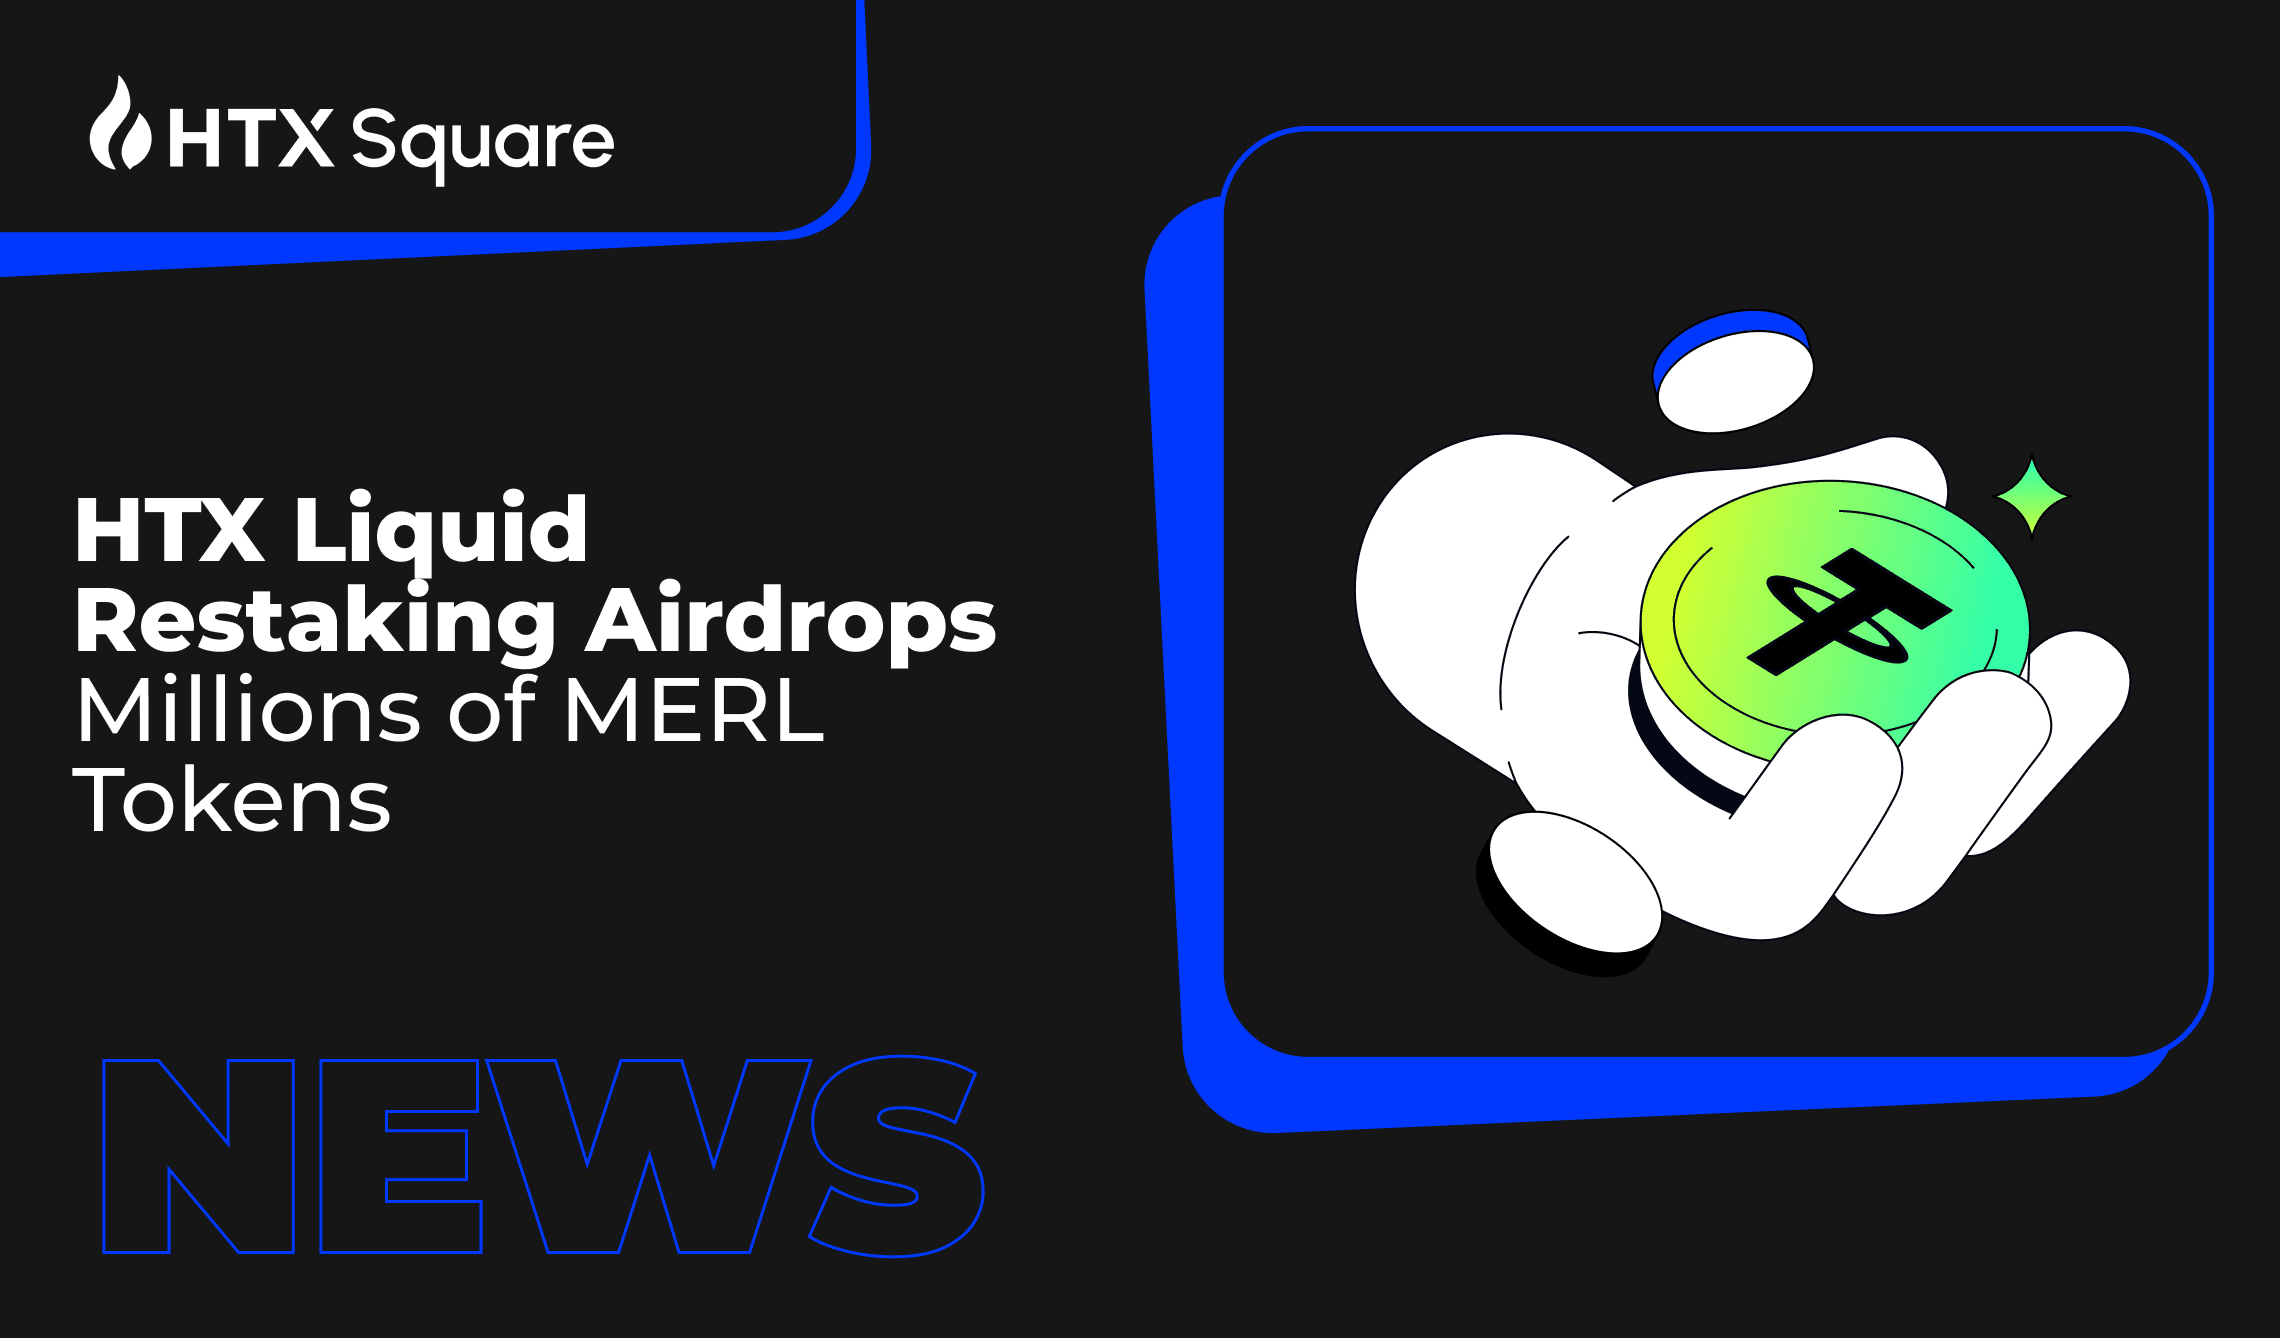 HTX Liquid Restaking Airdrops Millions of MERL Tokens – More Rewards on the Horizon